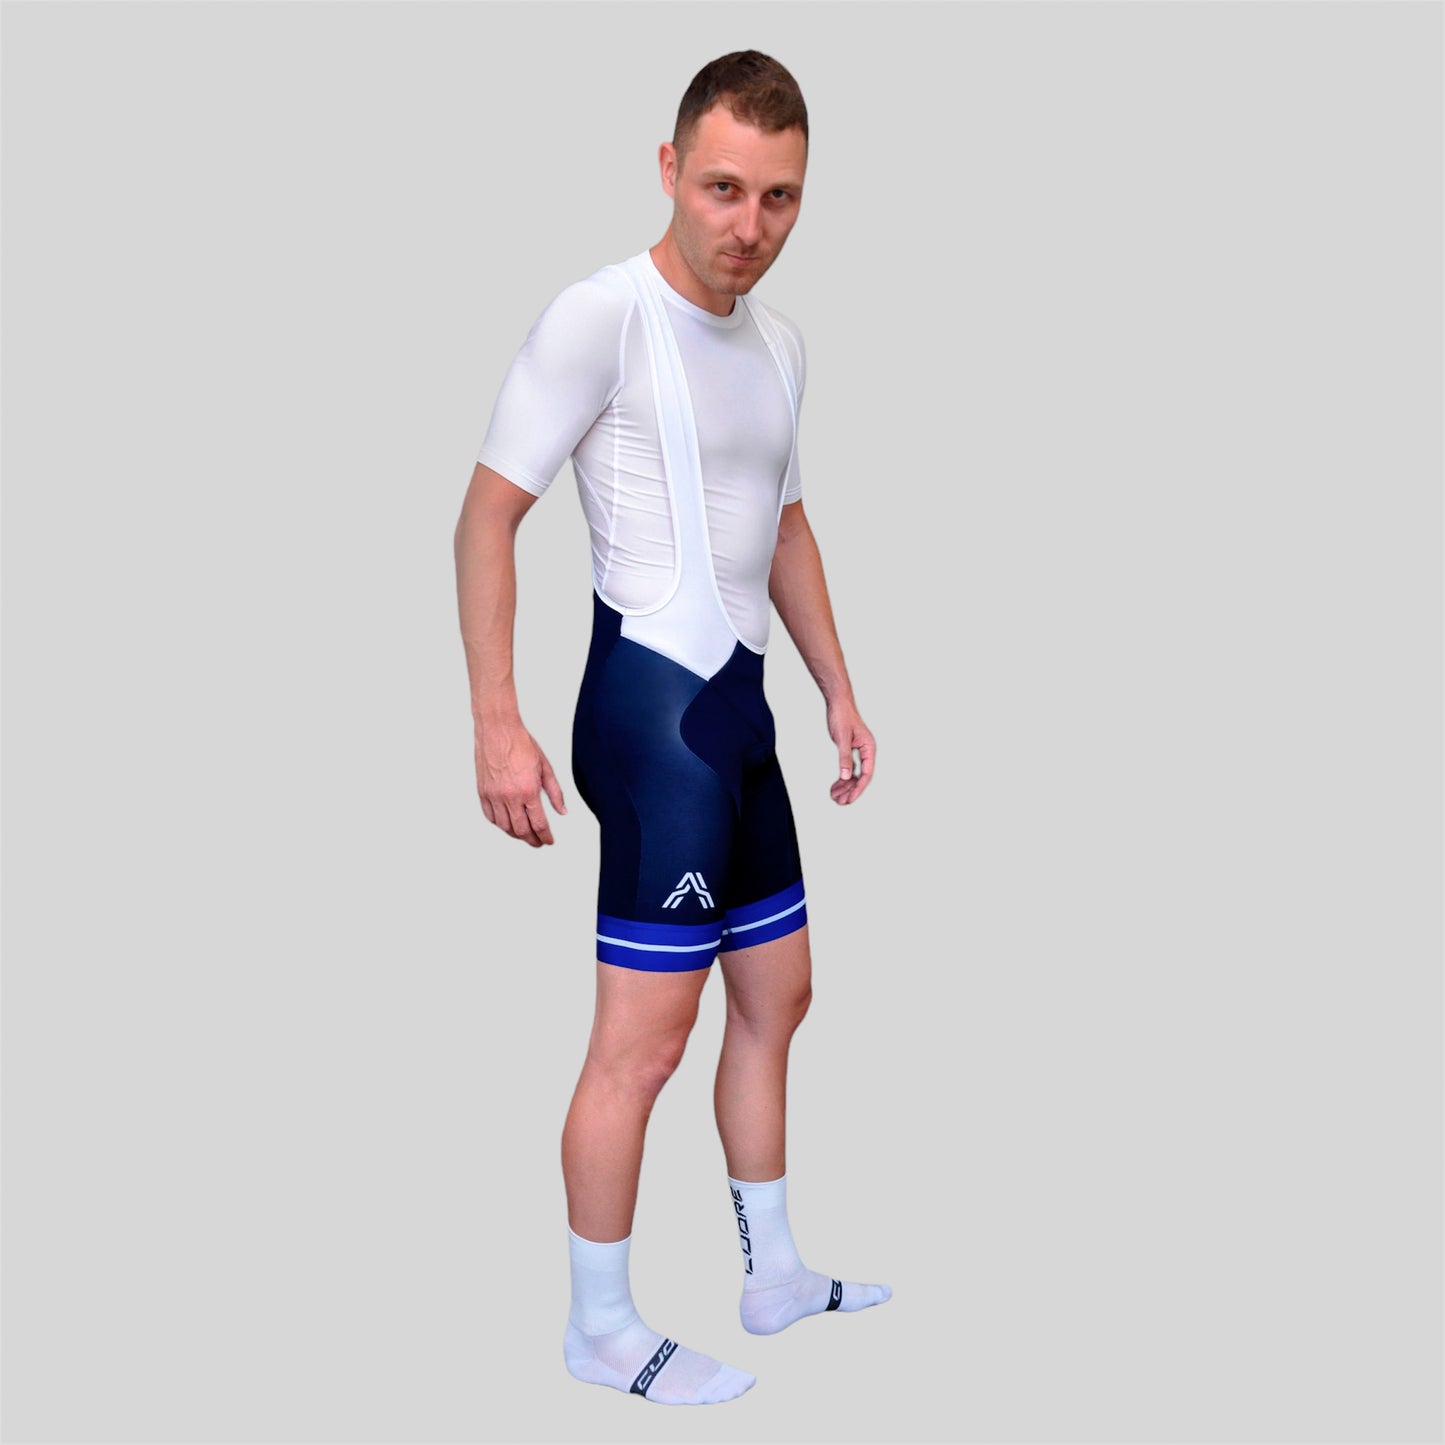 Mountain Edition Bibshort Blue from Ascender Cycling Club Zürich and Cuore of Switzerland Global Monogram View